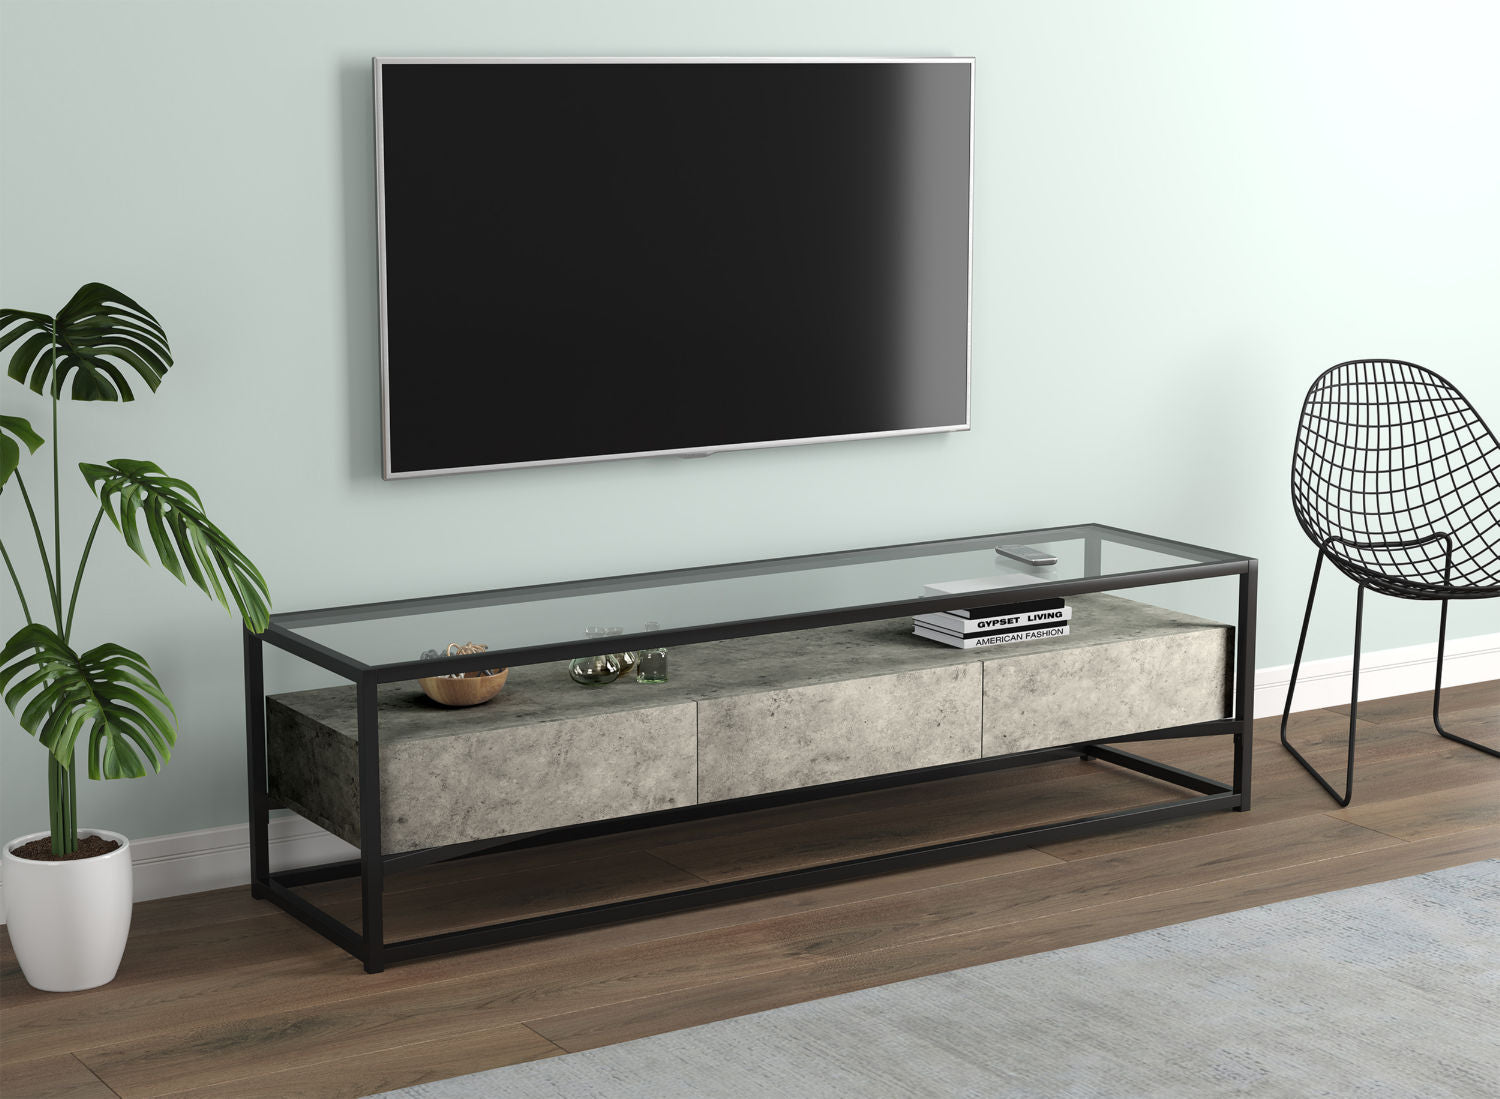 Tv Stand Dark Cement 3 Drawers Glass Top - DecoElegance - Entertainment Center and TV Stand